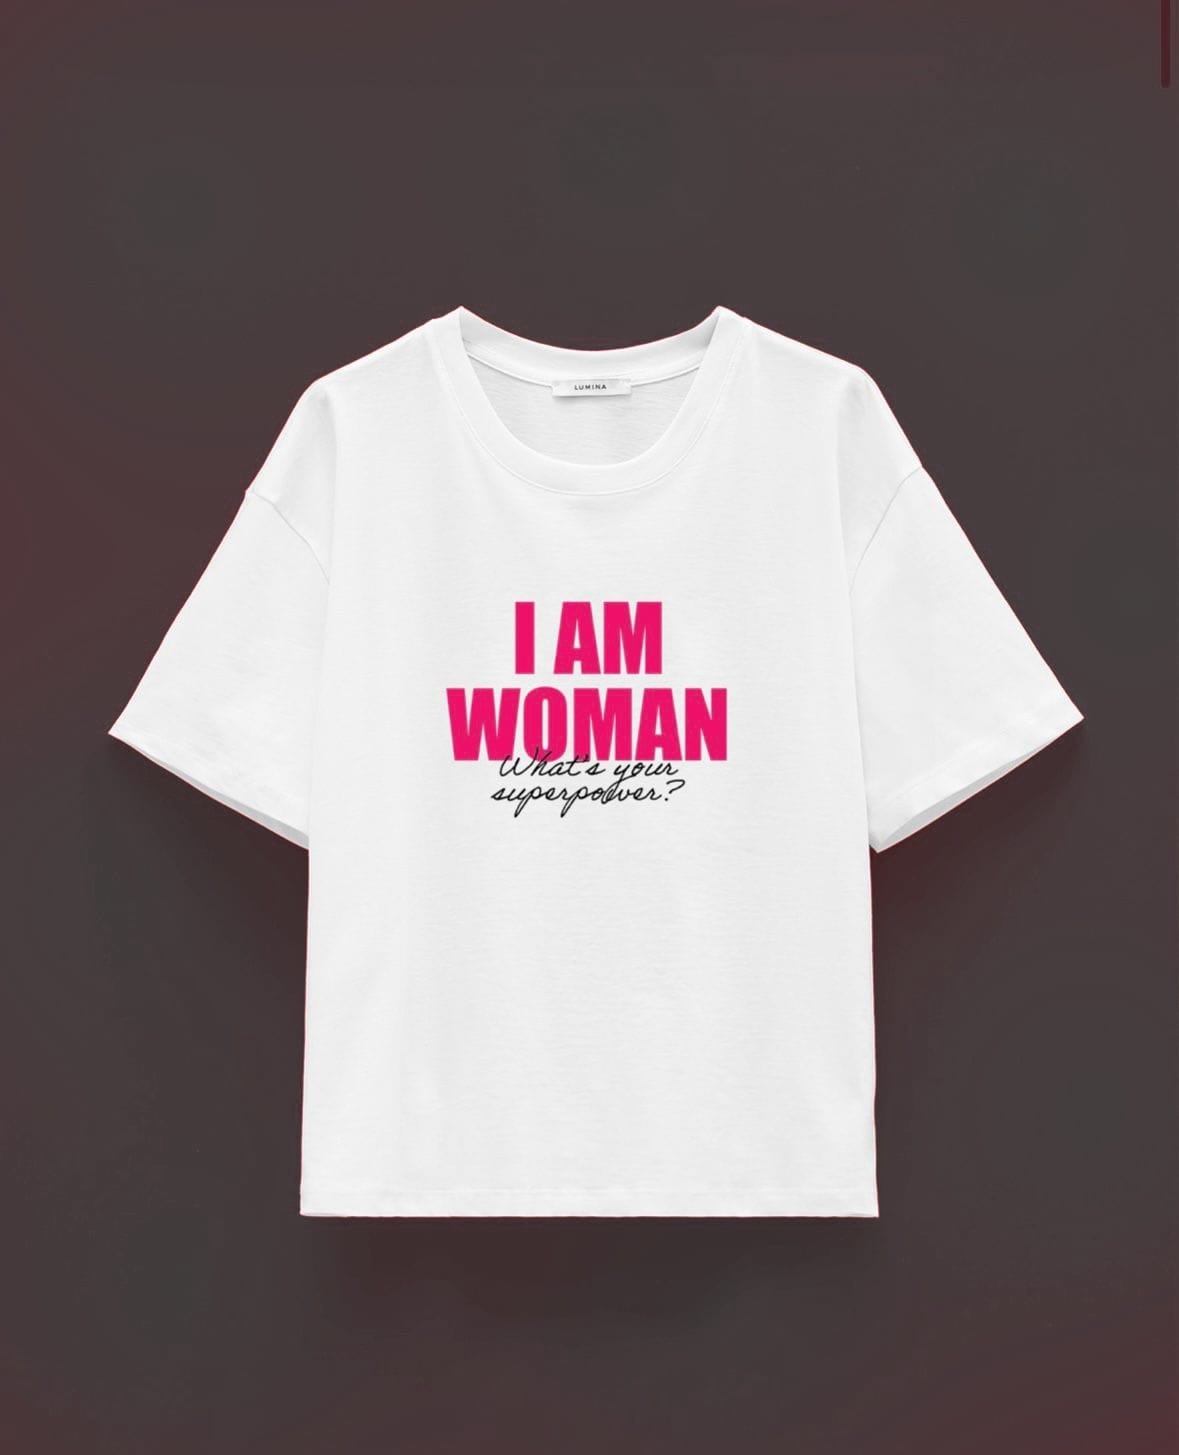 T-Shirt I AM WOMAN – weiss Womans Day Special